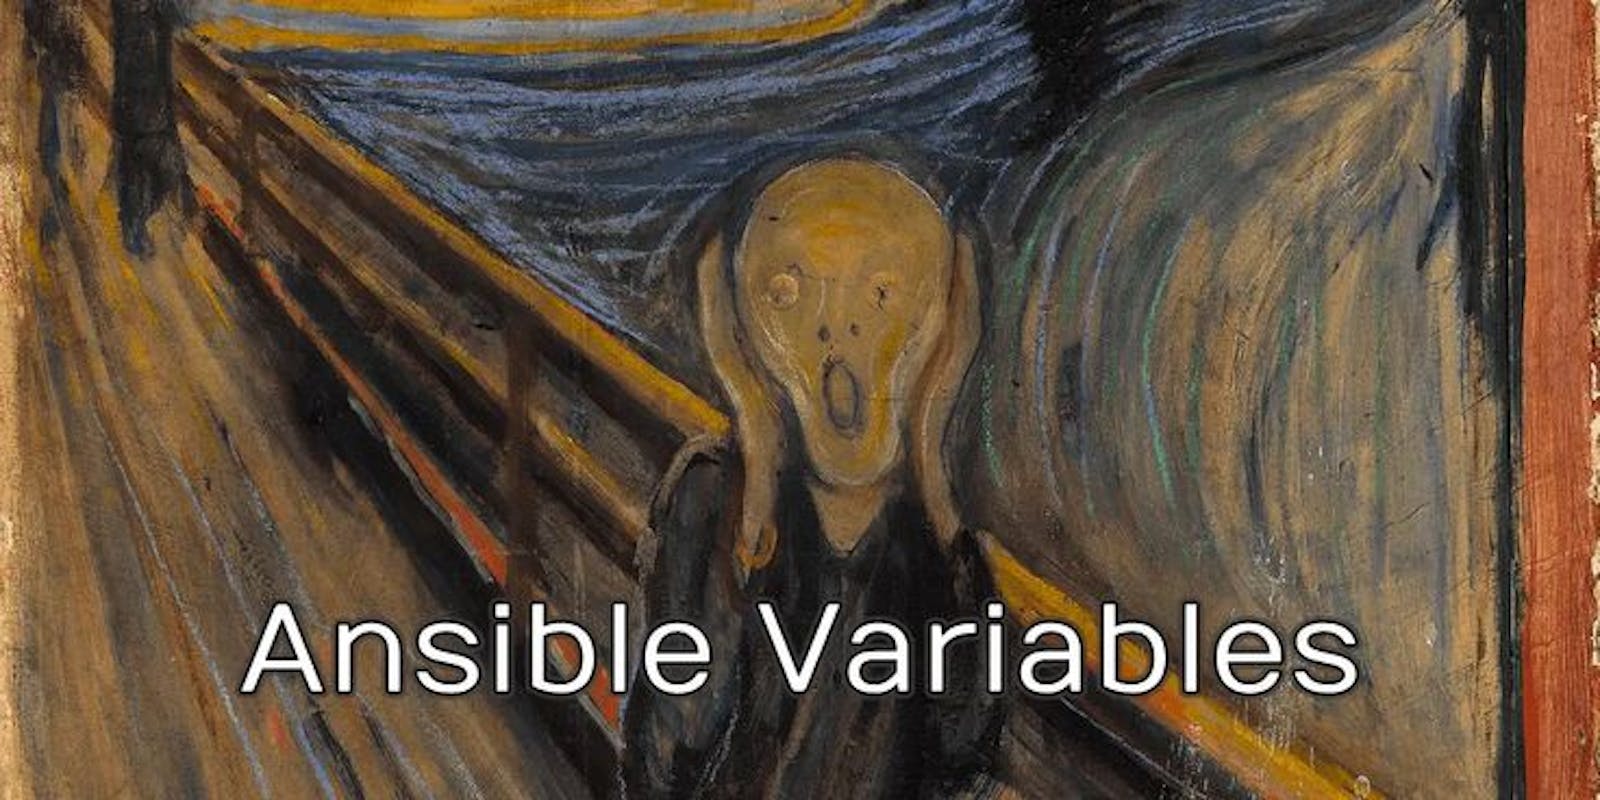 Managing Variables and Gathering Facts in Ansible